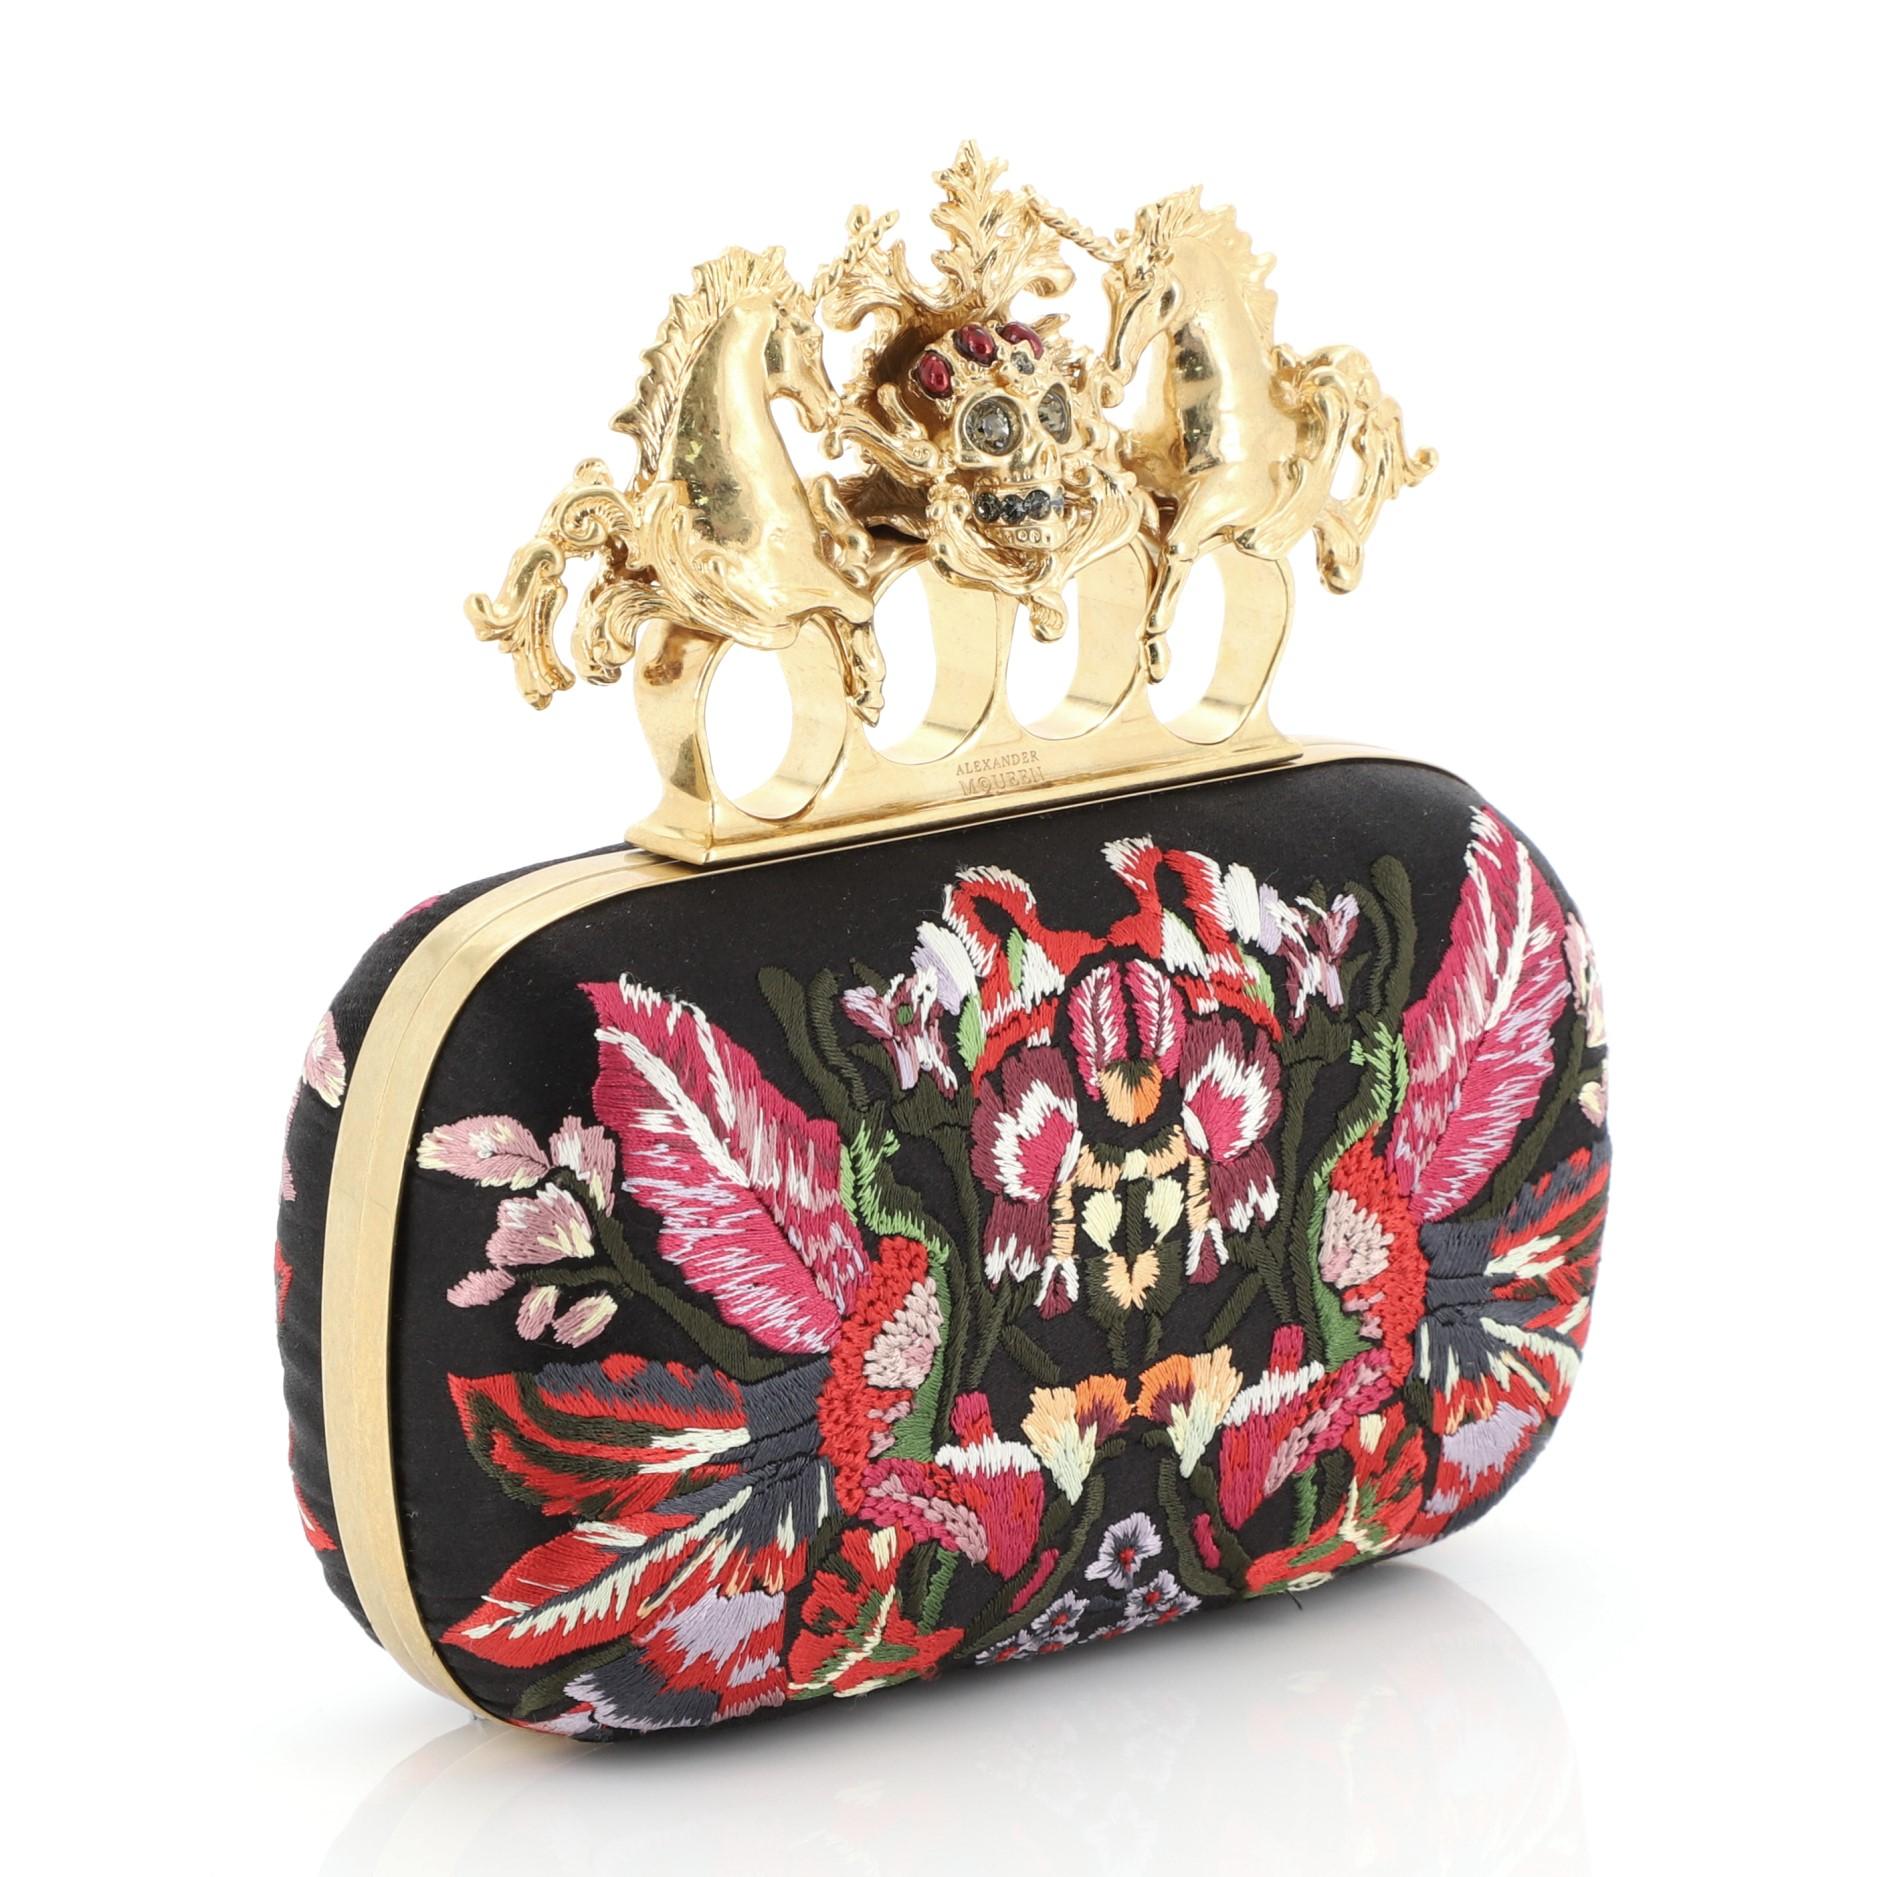 This Alexander McQueen Unicorn Skull Knuckle Box Clutch Embroidered Mesh Small is the perfect evening accessory for your nights out. Crafted in black embroidered mesh, features picturesque unicorn skull four-finger knuckle ring handle embellished